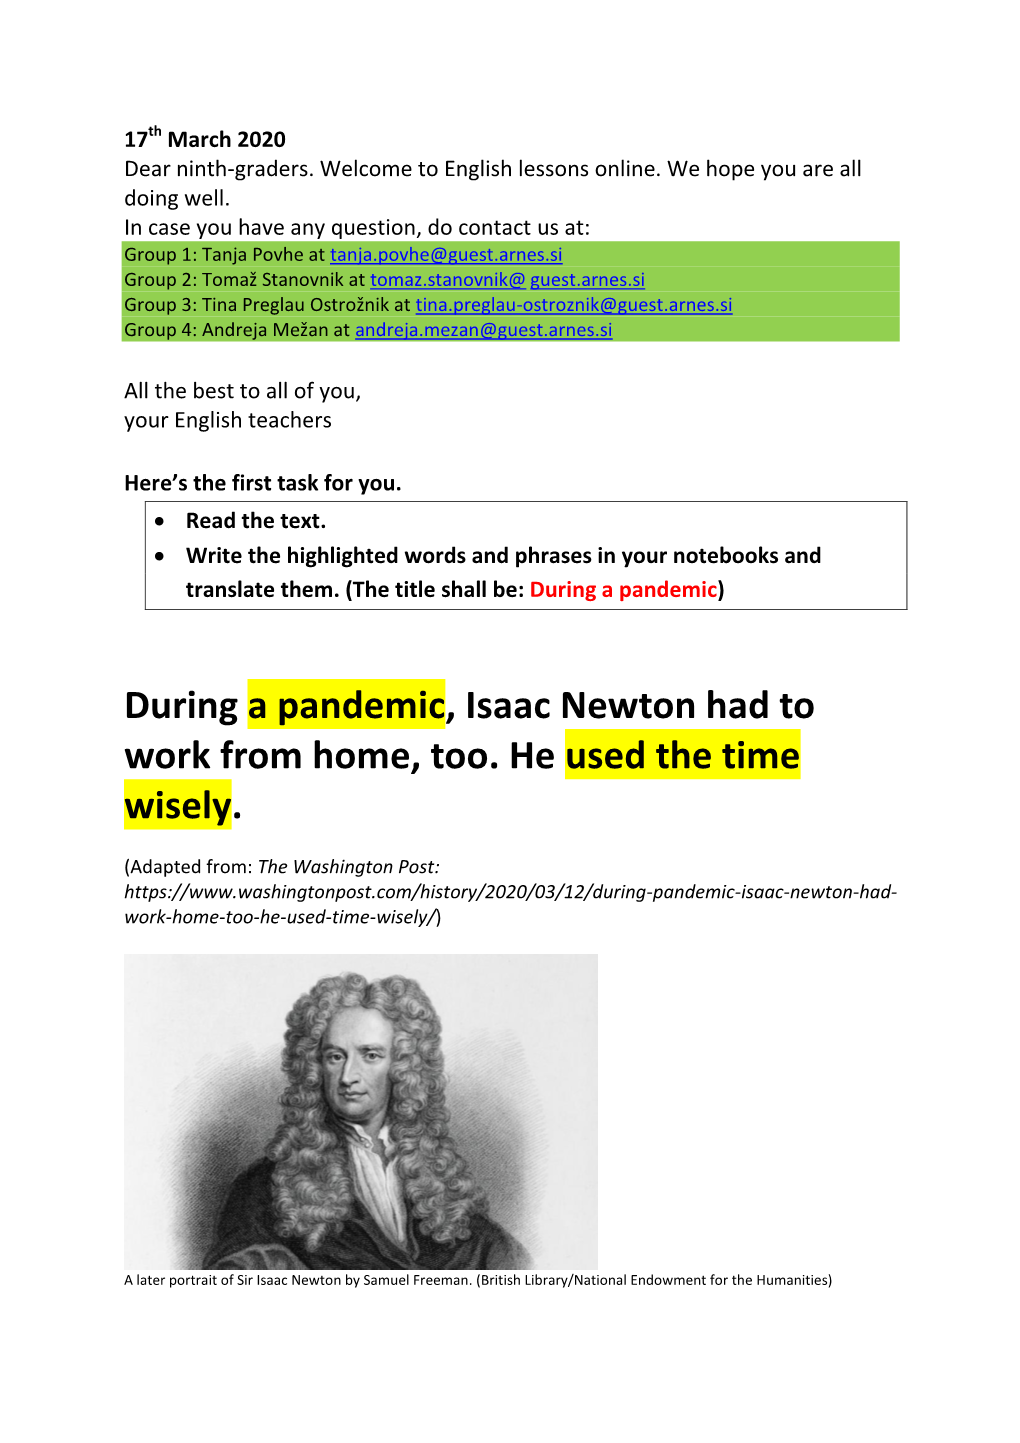 During a Pandemic, Isaac Newton Had to Work from Home, Too. He Used the Time Wisely